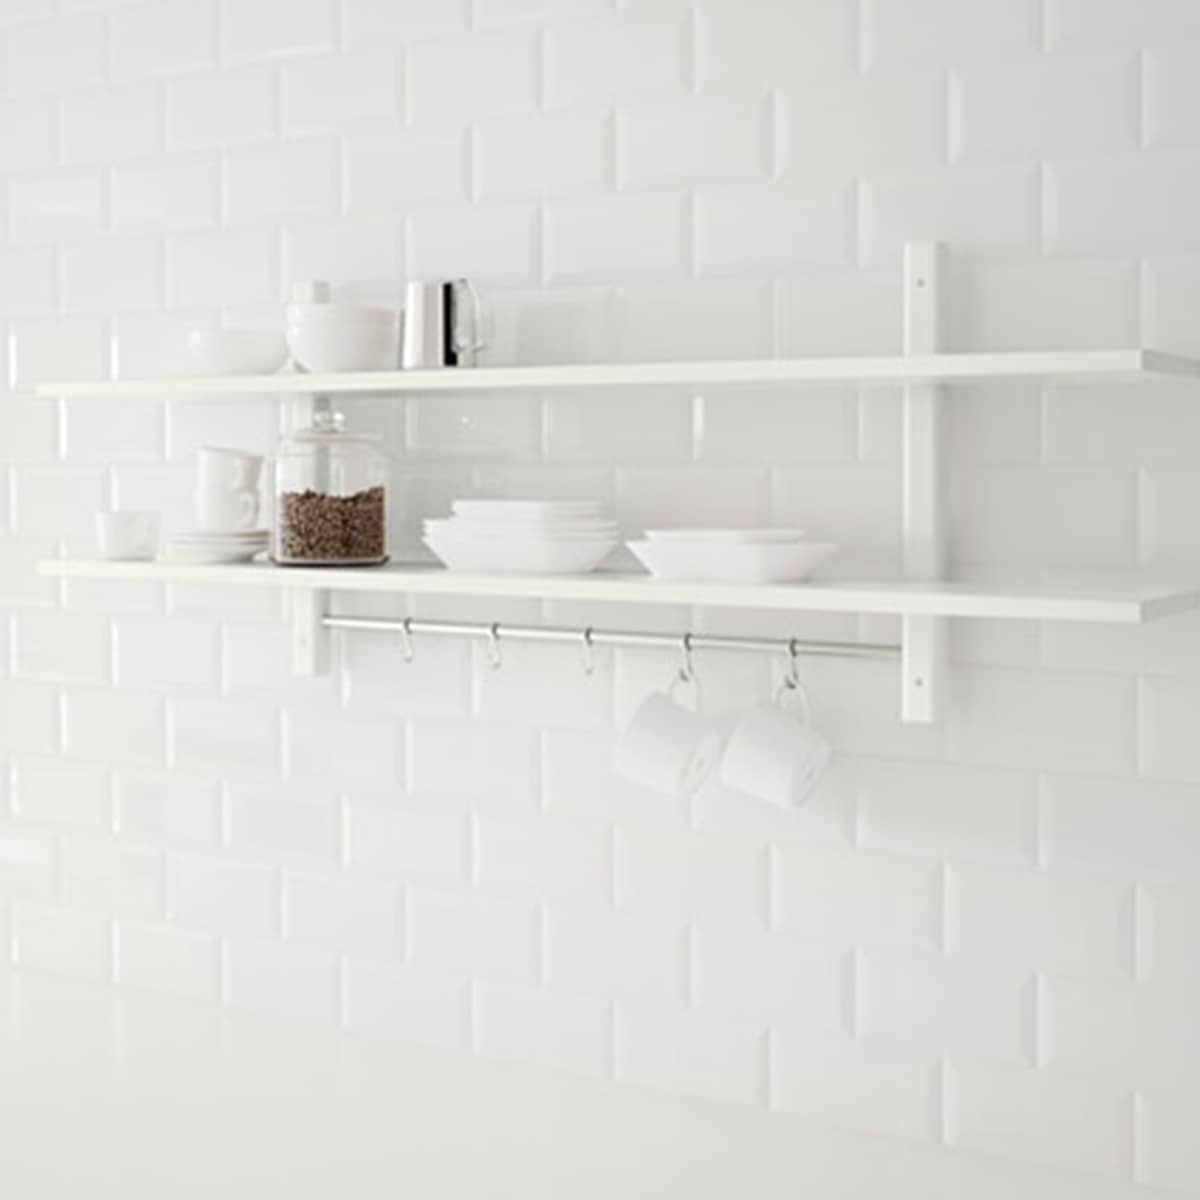 Ikea Kitchen Wall Shelves
 The Best IKEA Shelves For the Kitchen